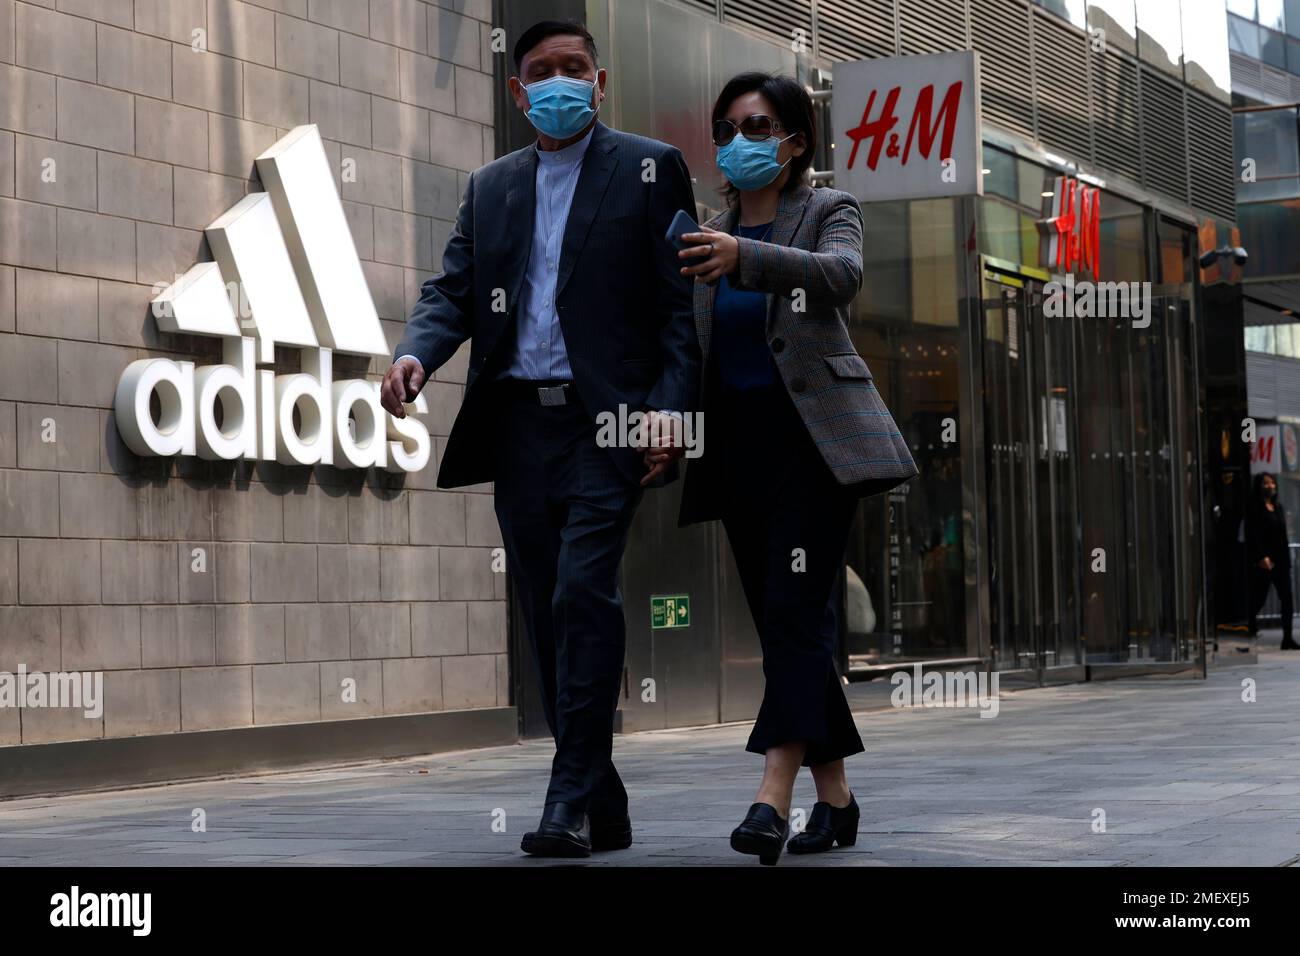 Visitors to a mall shopping area pass by Adidas and H&M stores in Beijing,  Thursday, March 25, 2021. China's ruling Communist Party is lashing out at  H&M and other clothing and footwear